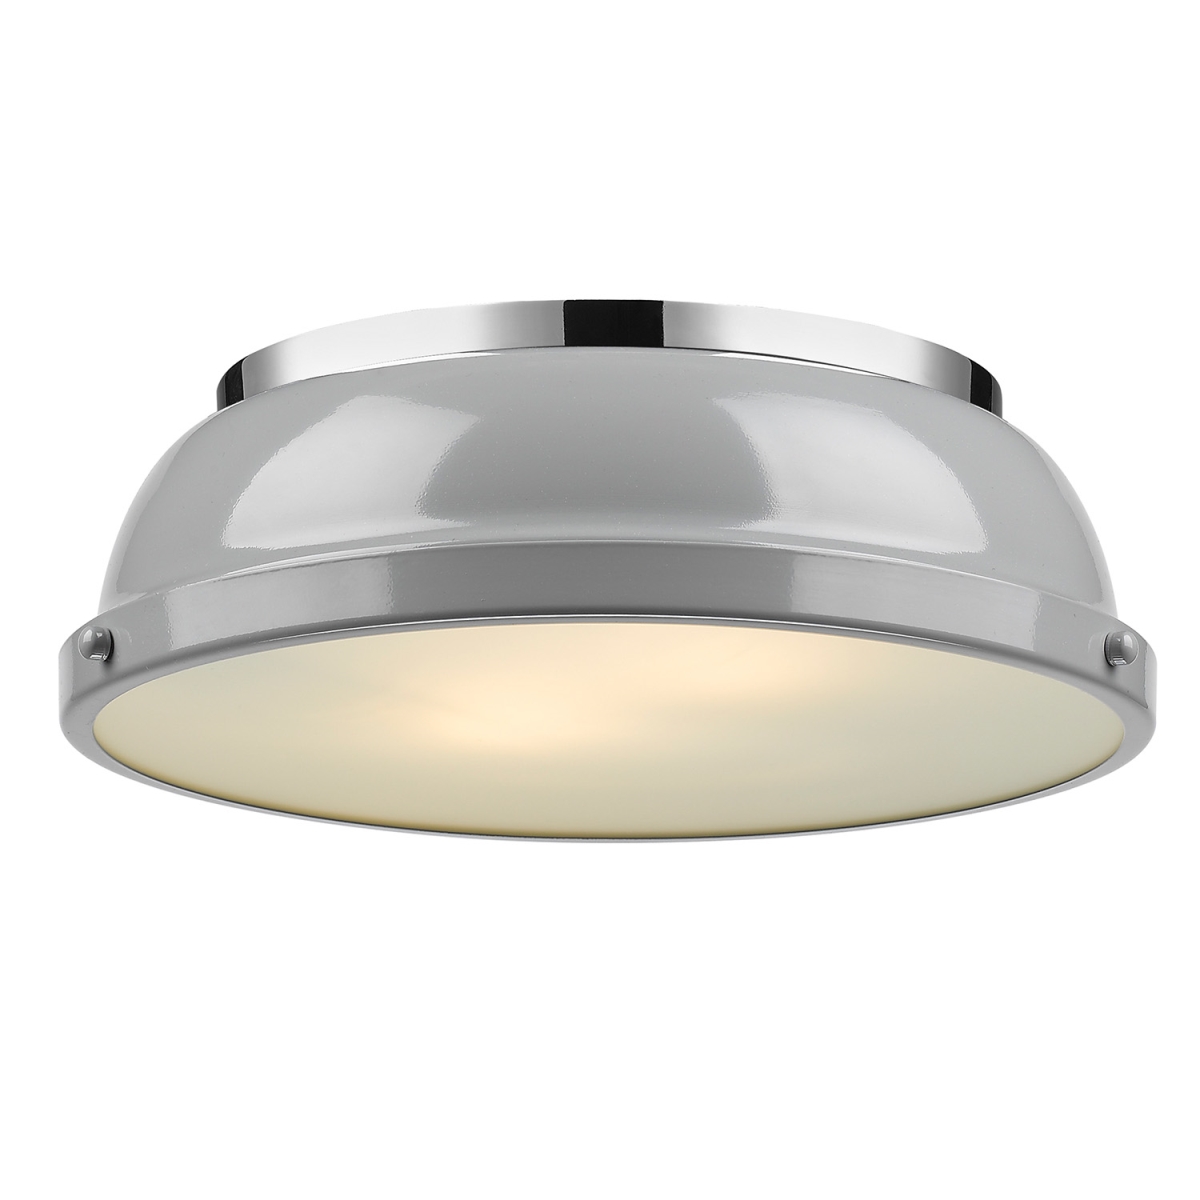 3602-14 Ch-gy Duncan 14 In. Flush Mount Light With Gray Shade, Chrome